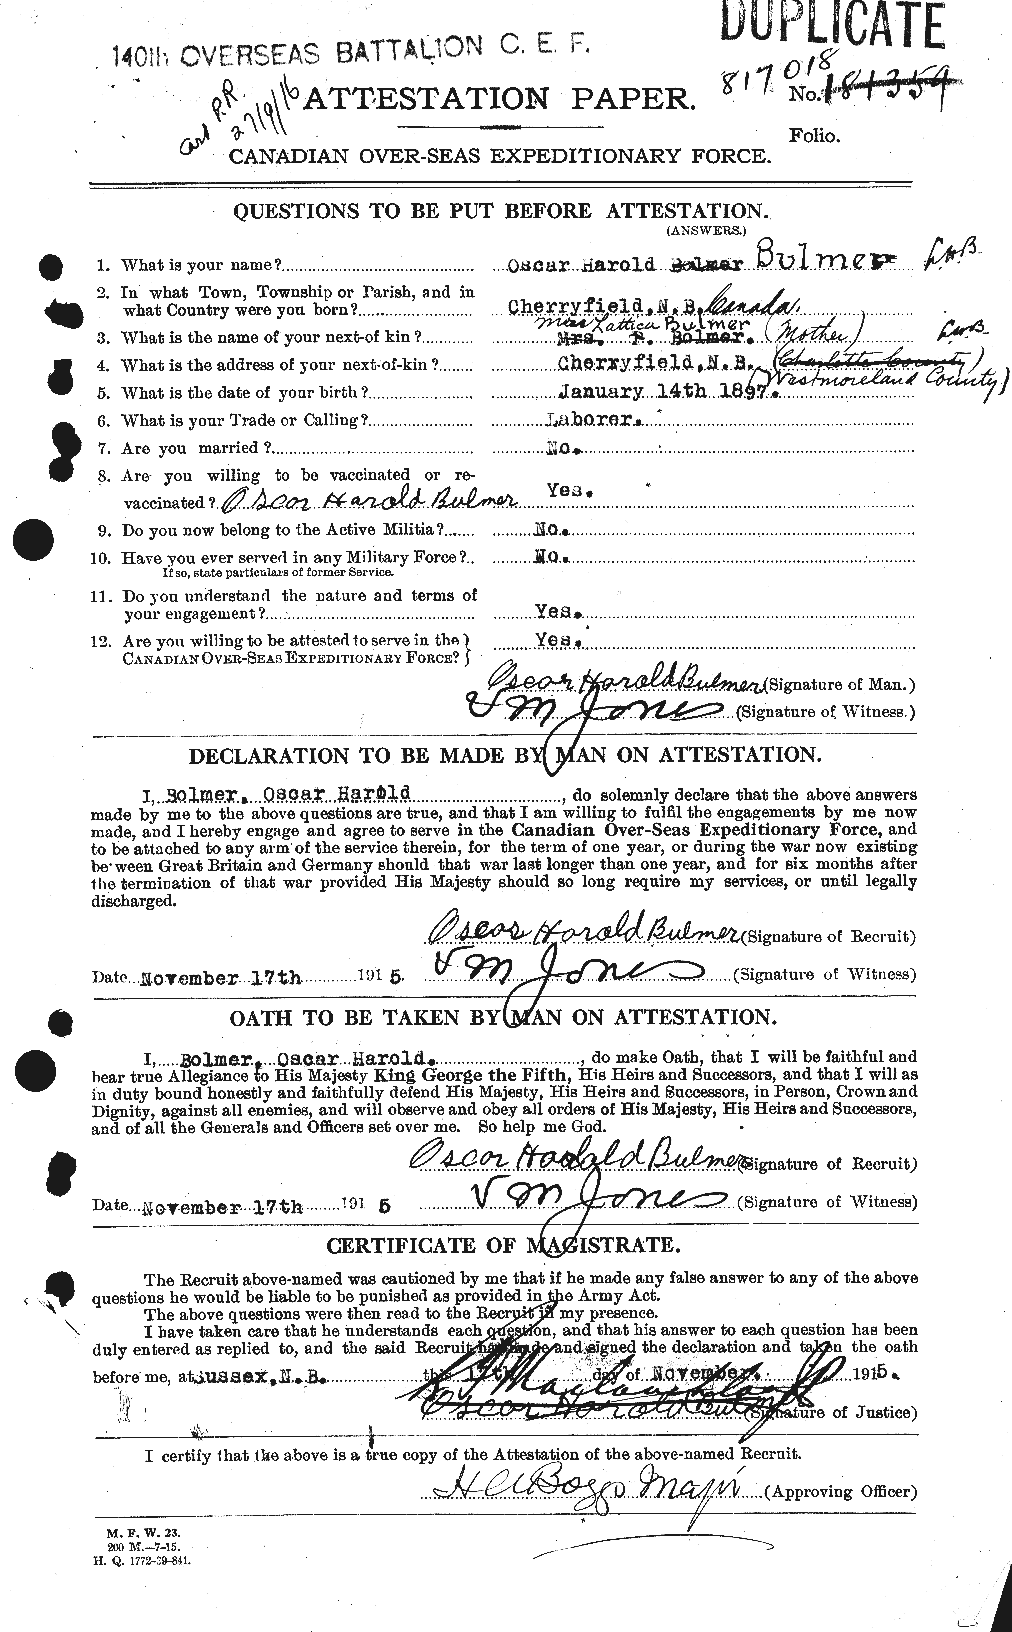 Personnel Records of the First World War - CEF 269835a